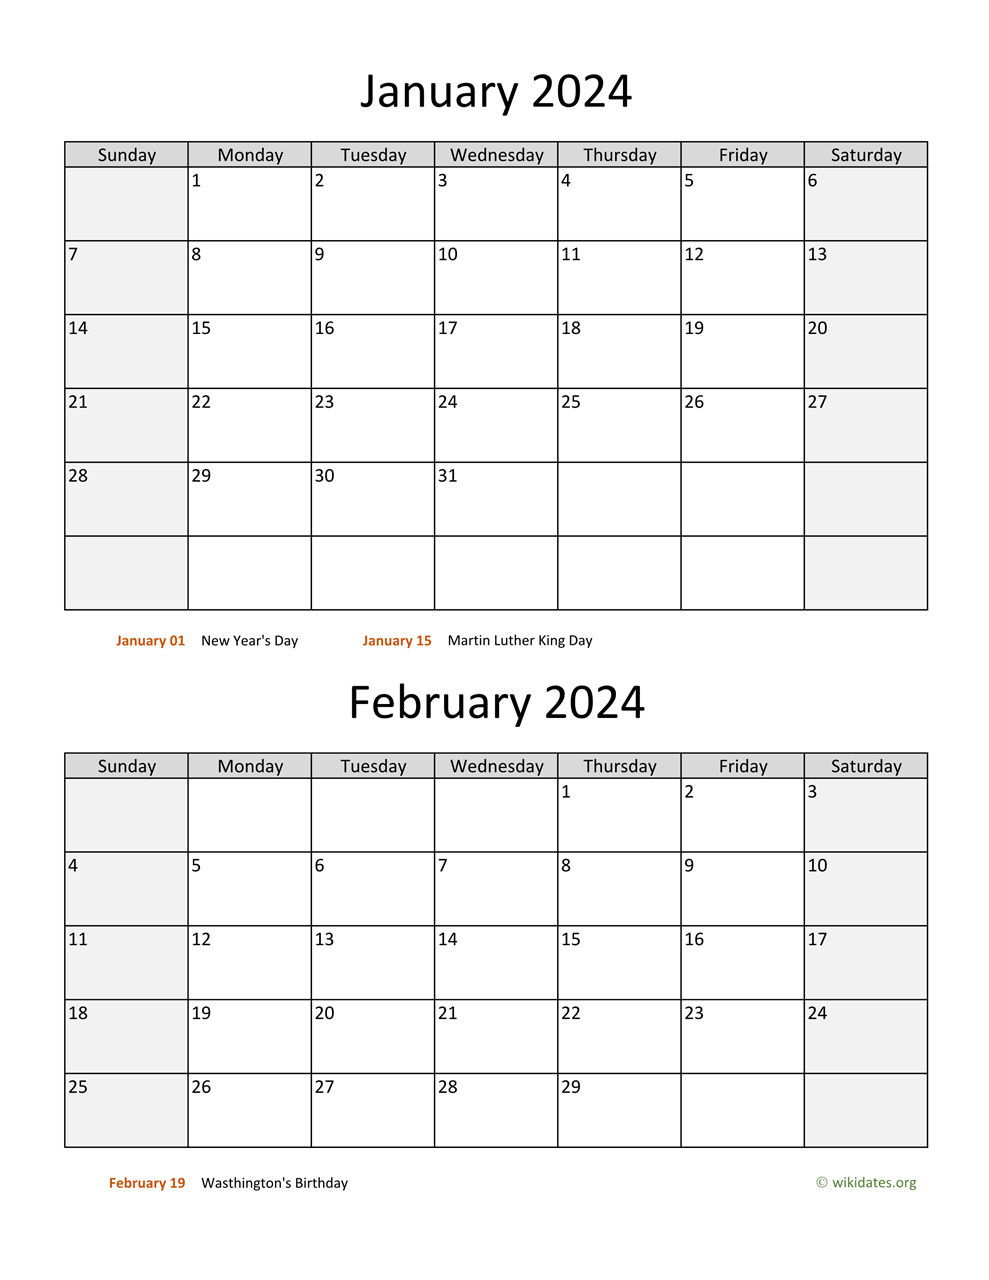 Printable Bi Monthly 2024 Calendar WikiDates - Free Printable 2024 Calendar Two Months Per Page